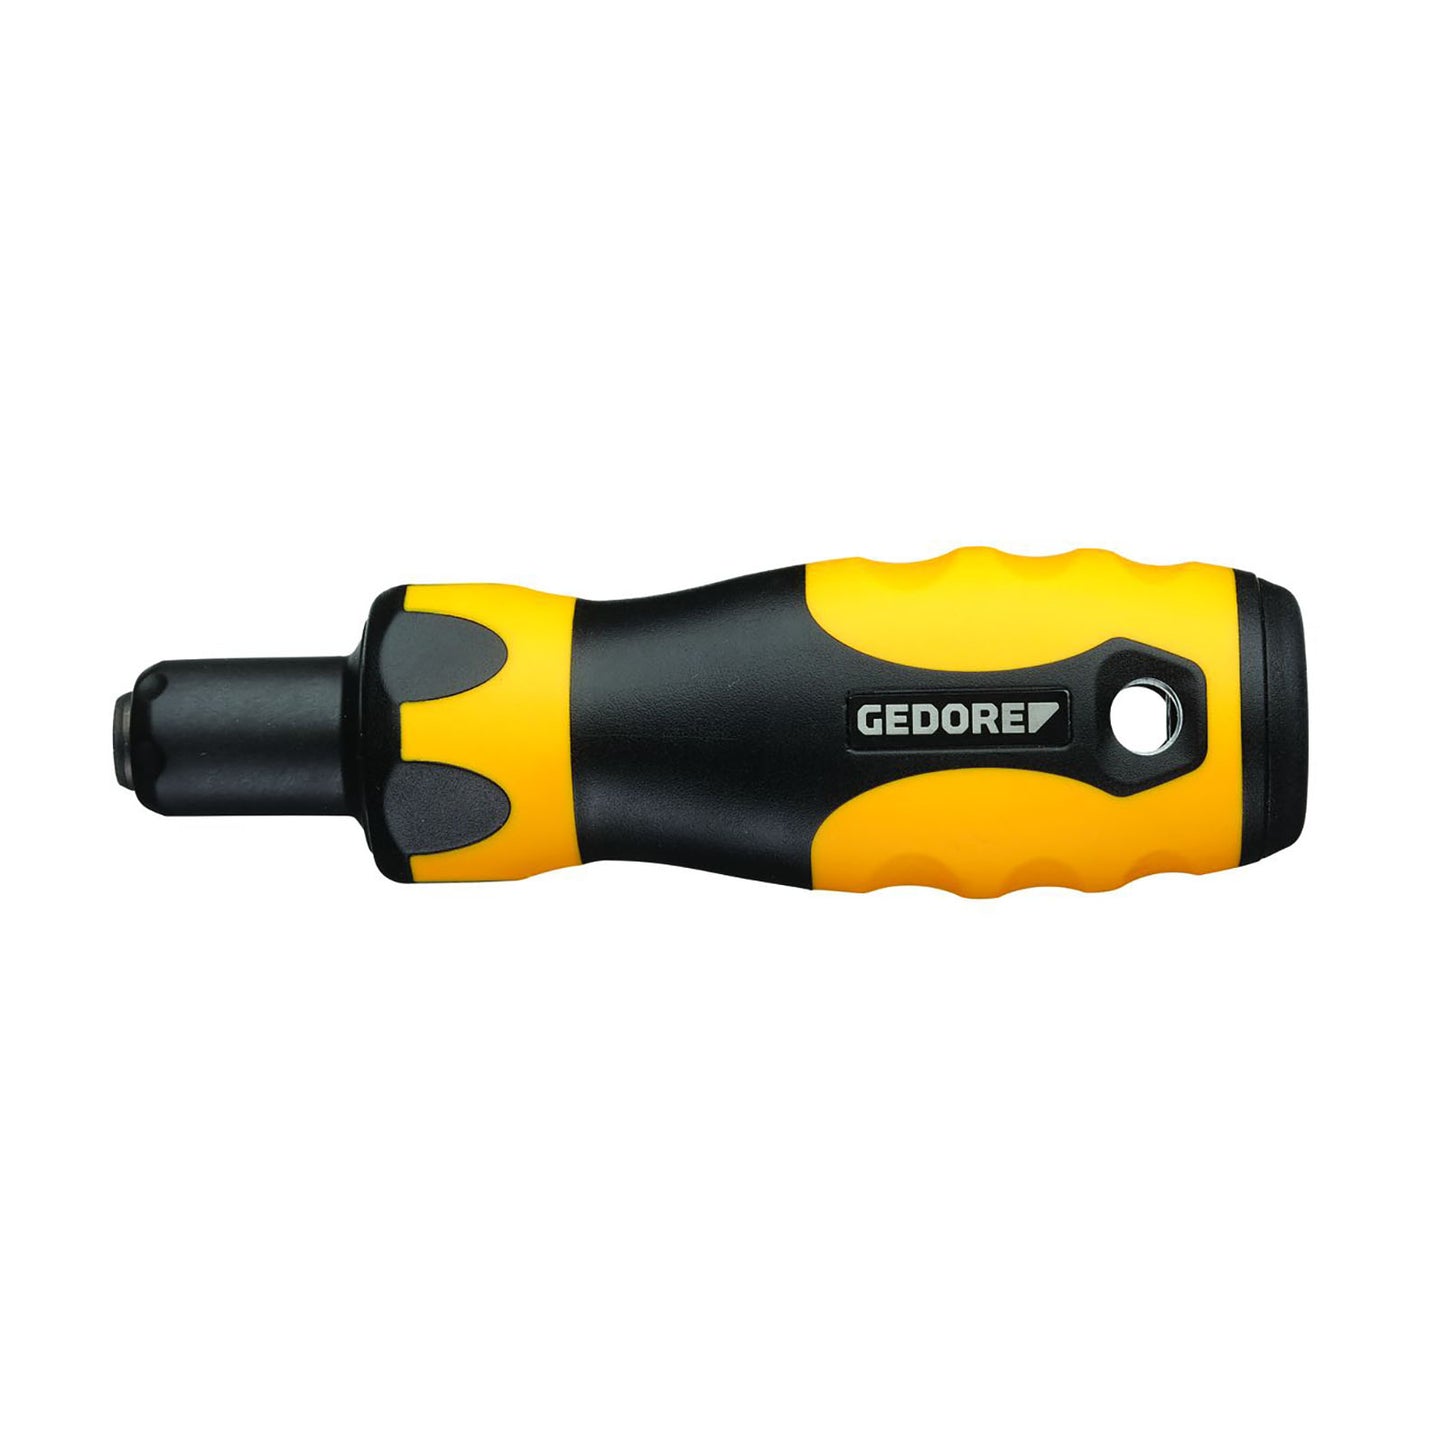 GEDORE ESD 450 FH - PGNE Screwdriver 0.5-4.5 Nm (2927810)